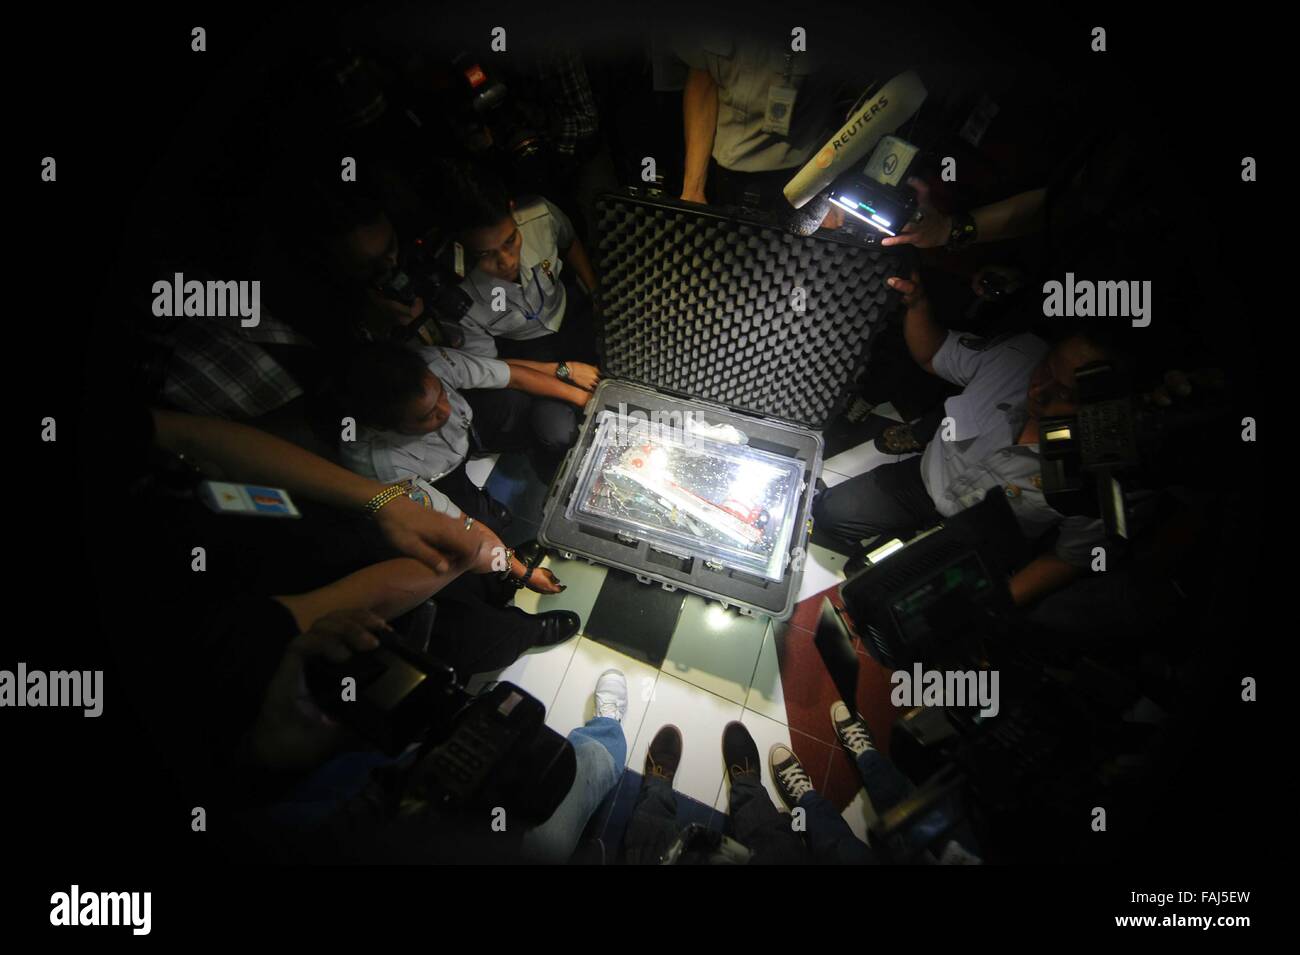 Beijing, Indonesia. 12th Jan, 2015. Indonesia's National Transportation Safety Committee (KNKT) members open the hardcase of Flight Data Recorder (FDR) of AirAsia Flight QZ8501 in Jakarta, Indonesia, Jan. 12, 2015. © Agung Kuncahya B./Xinhua/Alamy Live News Stock Photo